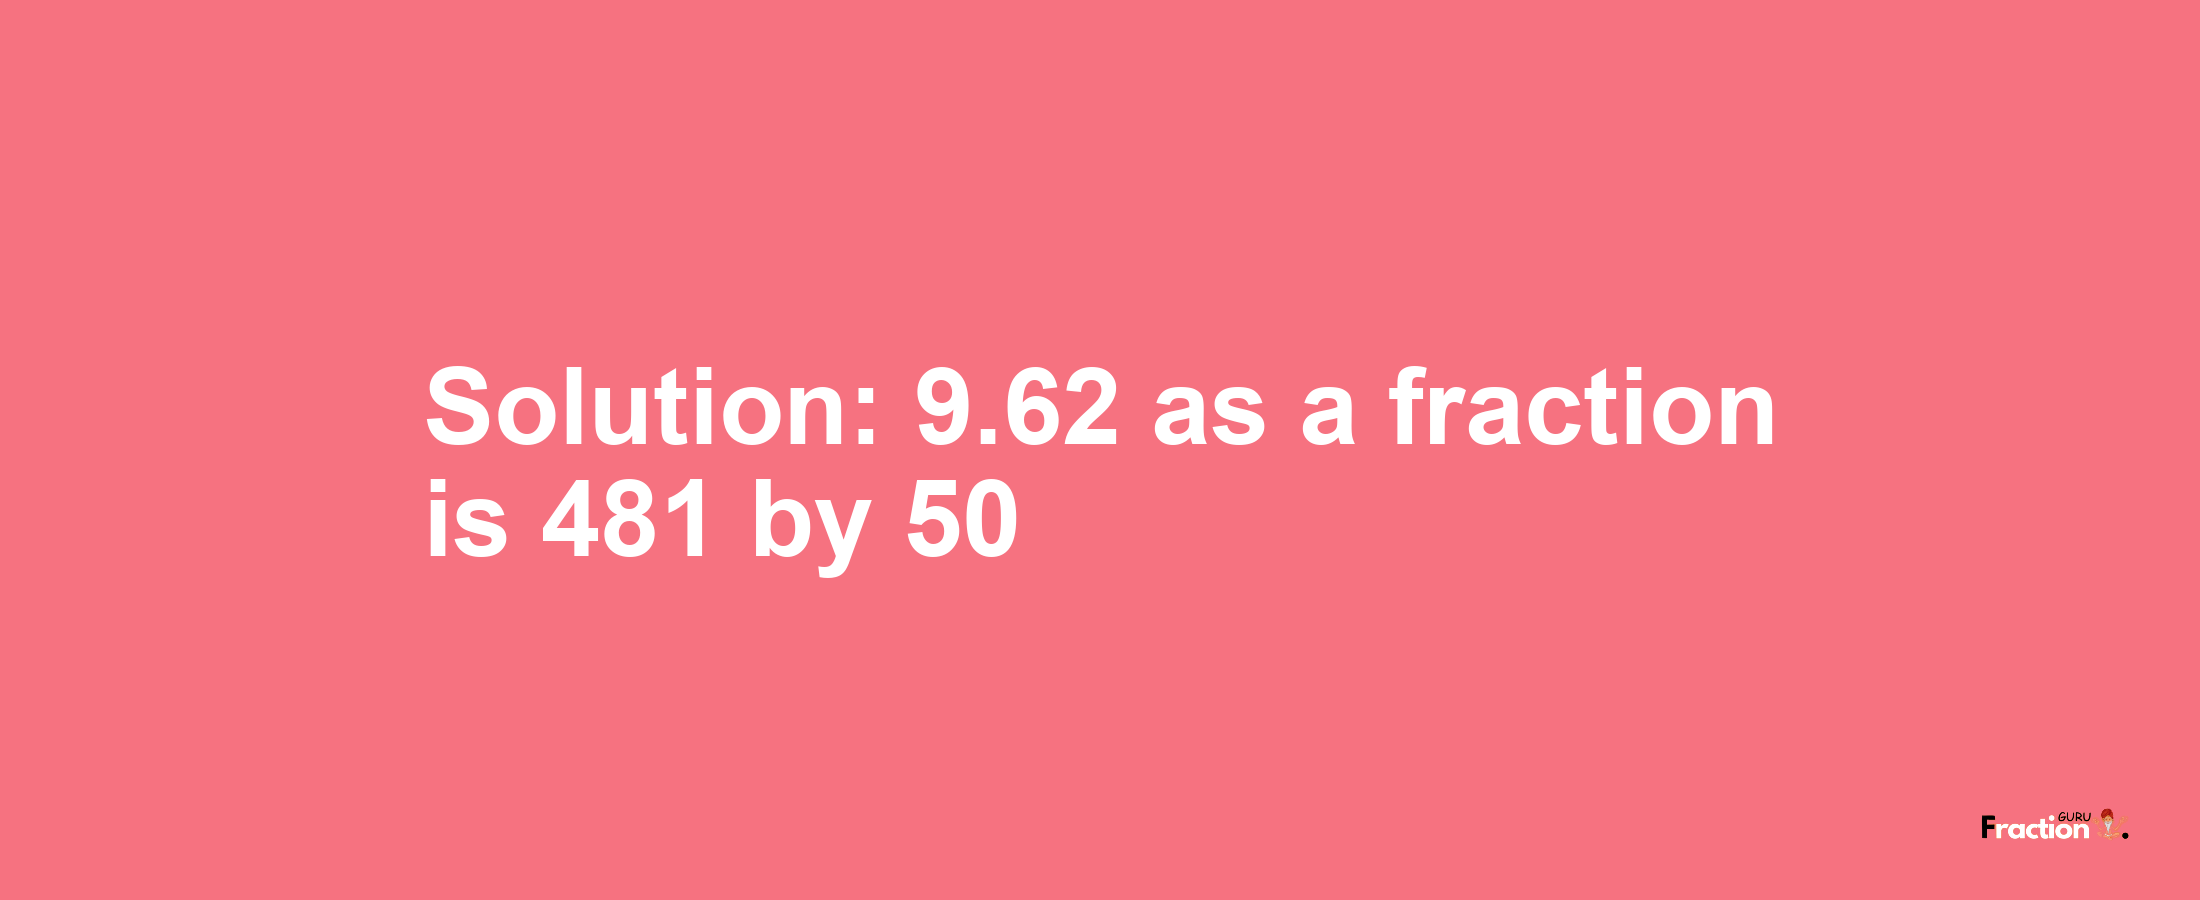 Solution:9.62 as a fraction is 481/50